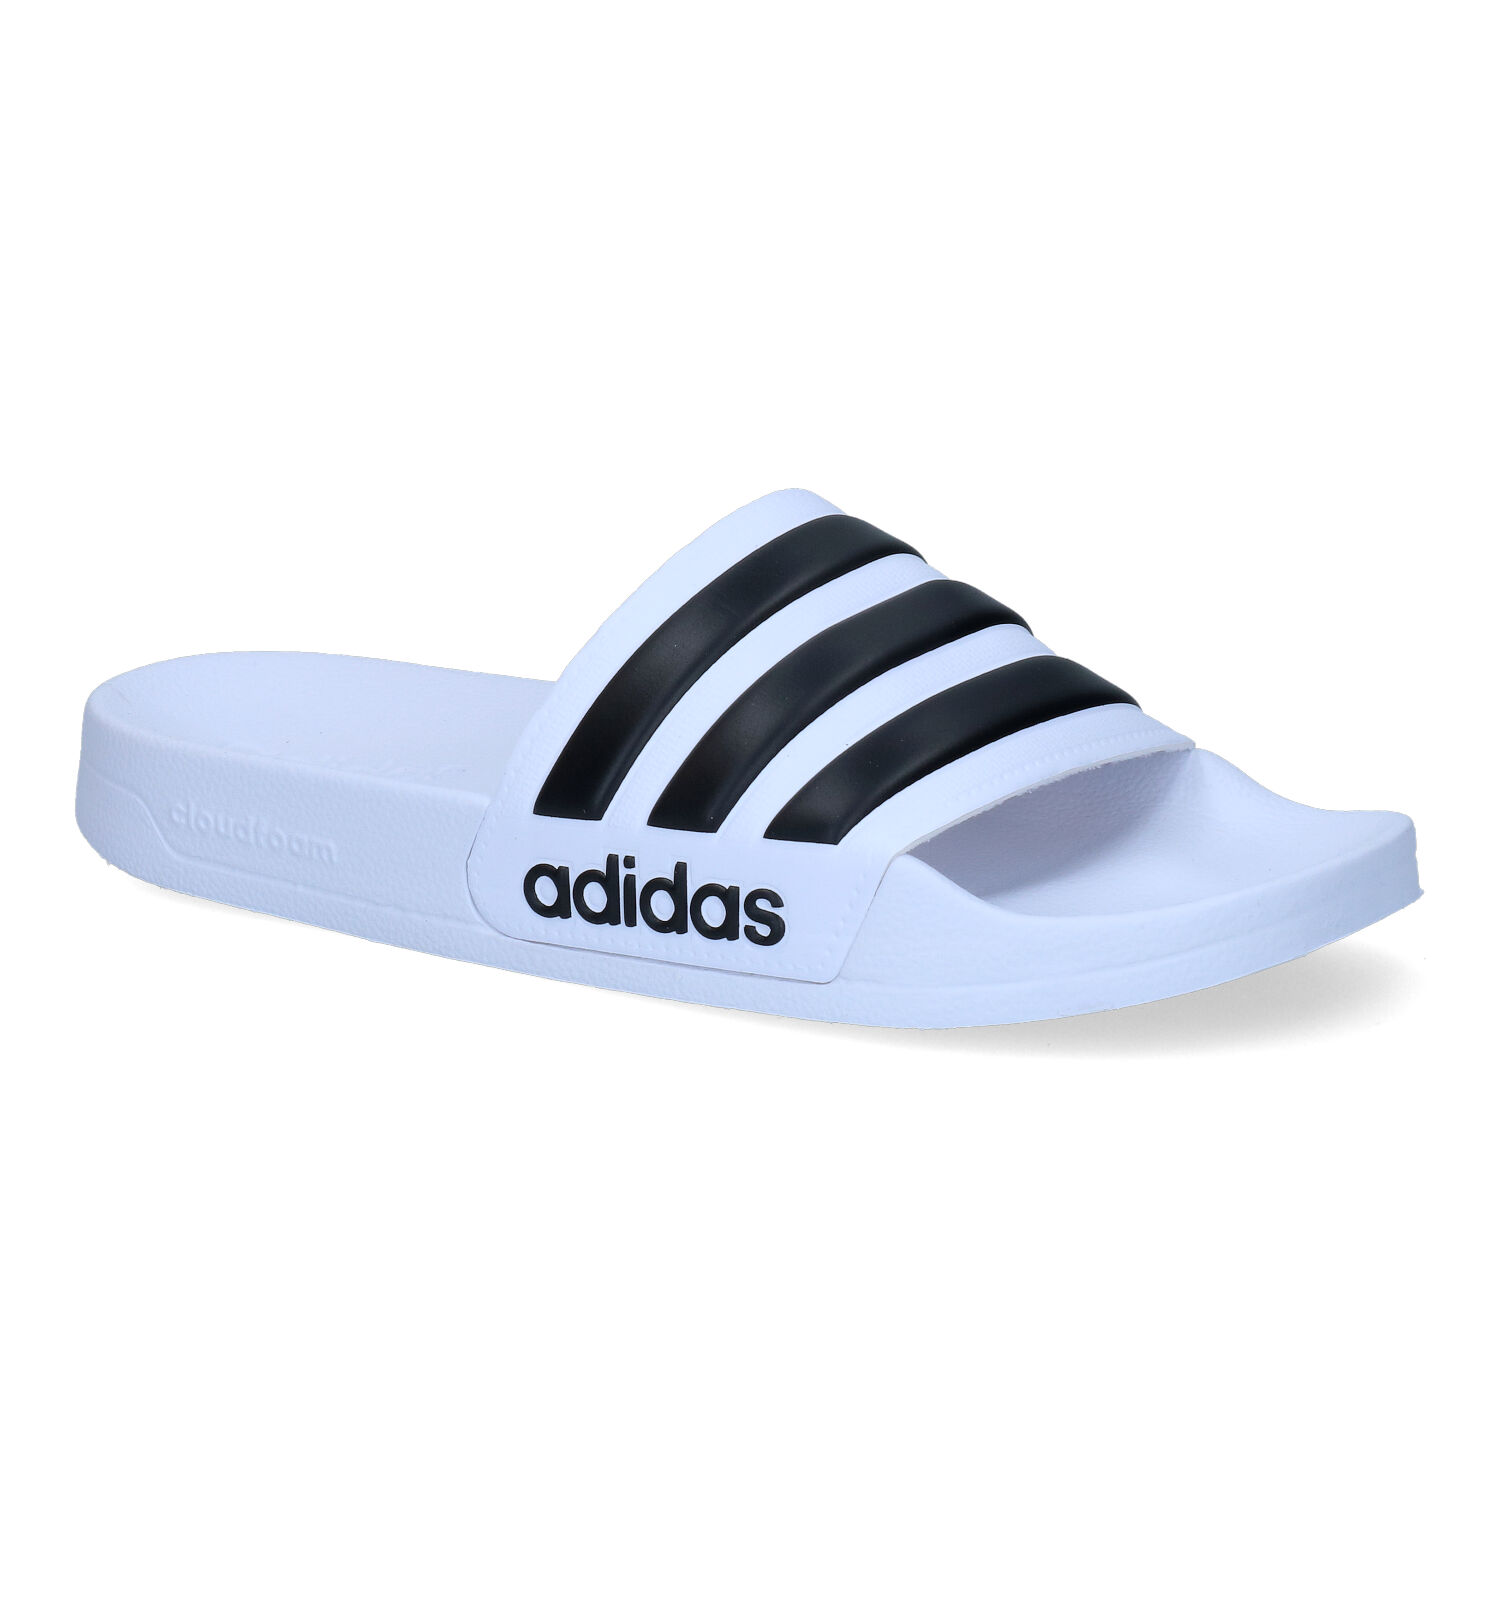 Matron Piraat Extreme armoede adidas Adilette Witte Badslippers | Dames Slippers